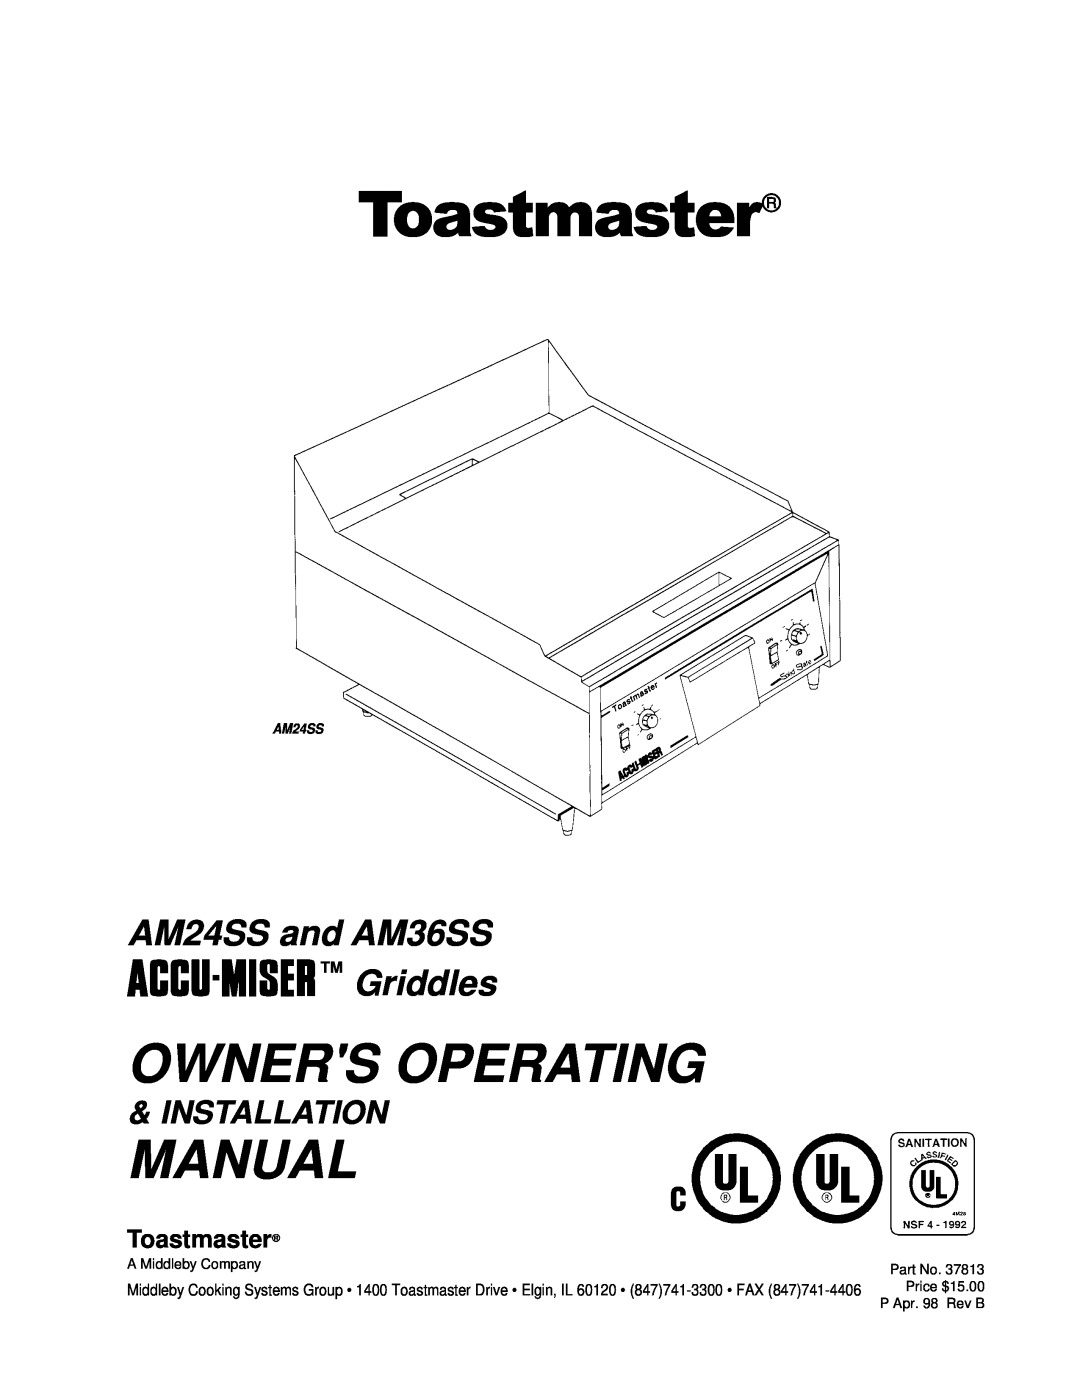 Toastmaster installation manual Toastmaster, Owners Operating, Manual, AM24SS and AM36SS Griddles, Installation 